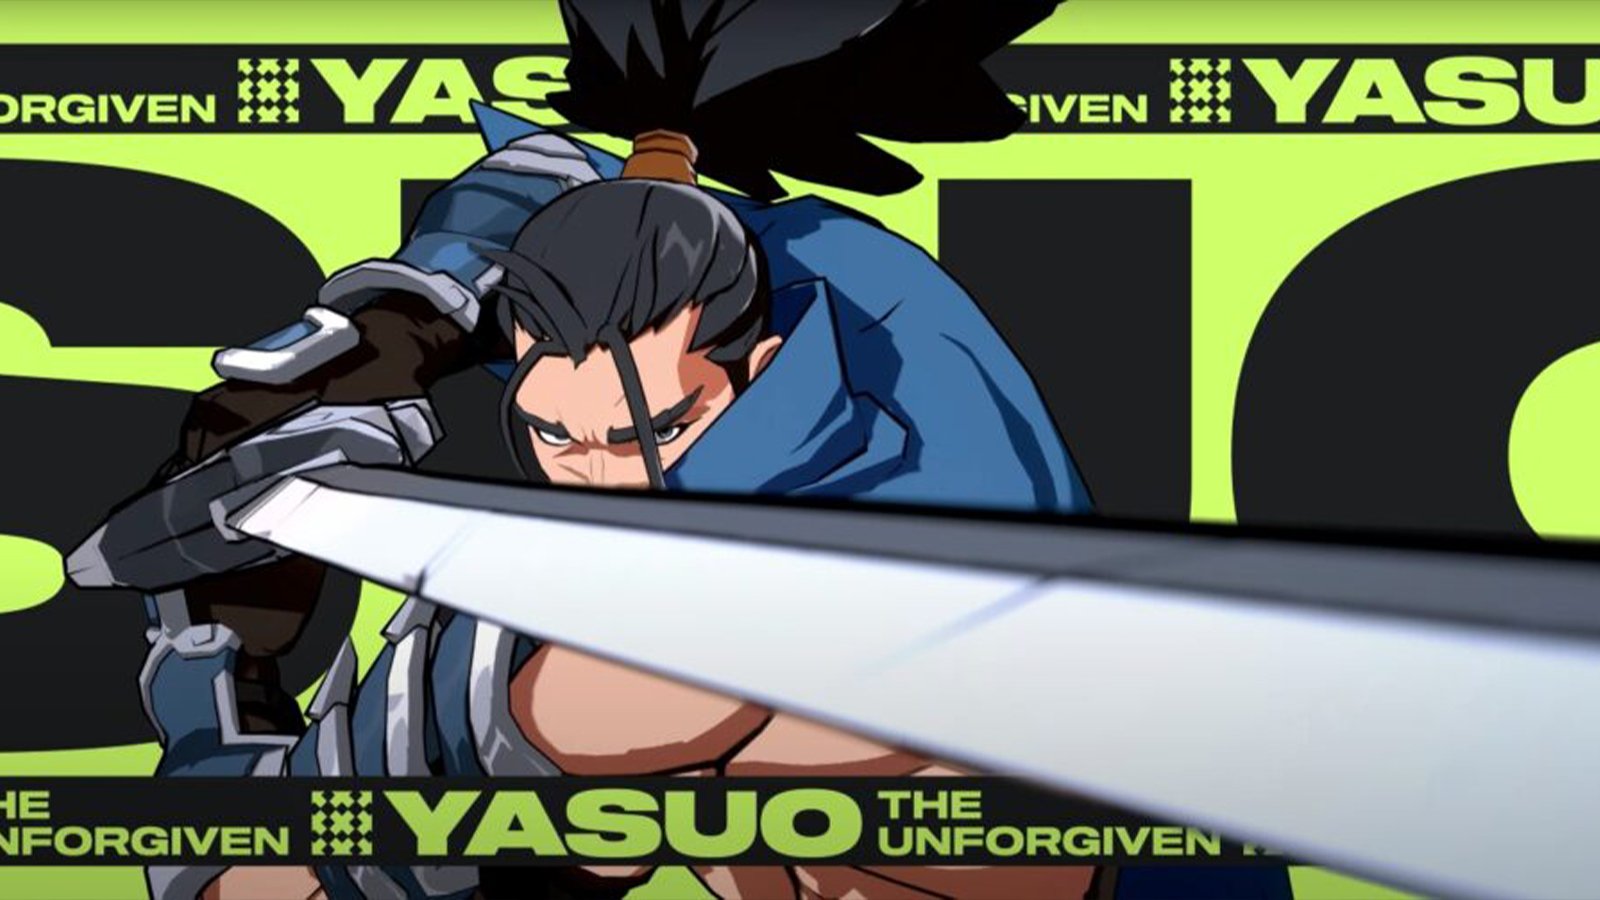 League of Legends fighting game Project L adds Yasuo to its roster